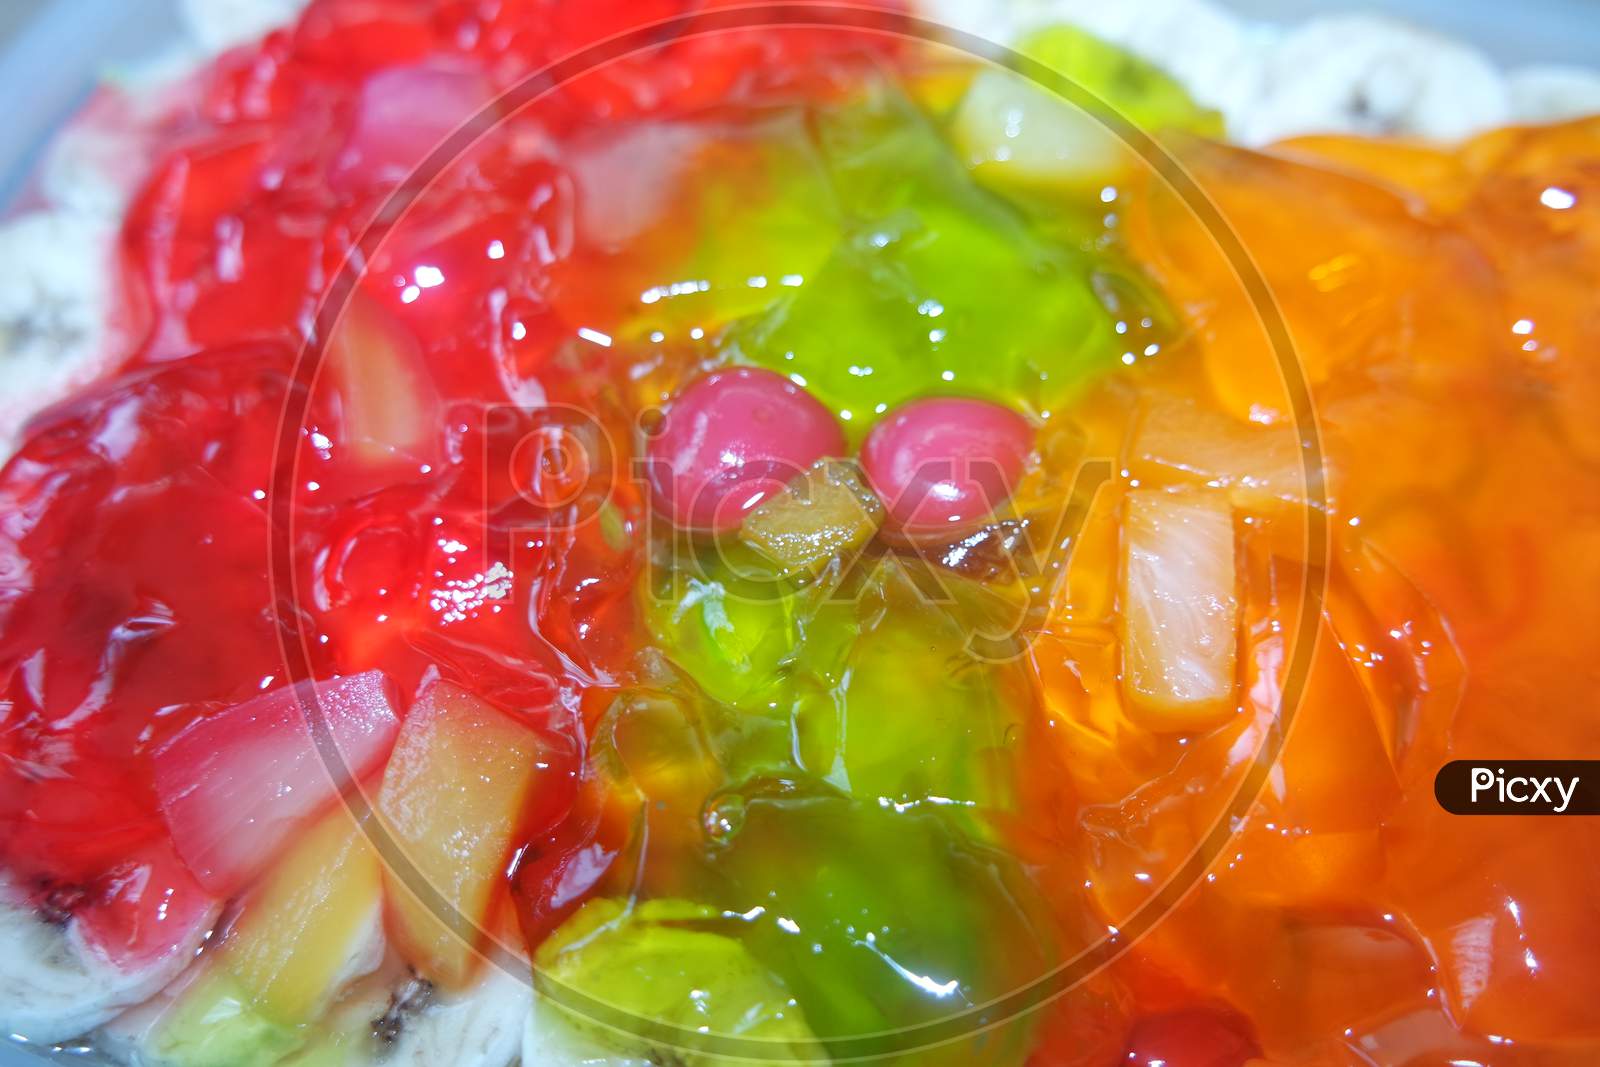 Creamy Custard Jelly Sweet Dish With Different Slices Layered On Surface